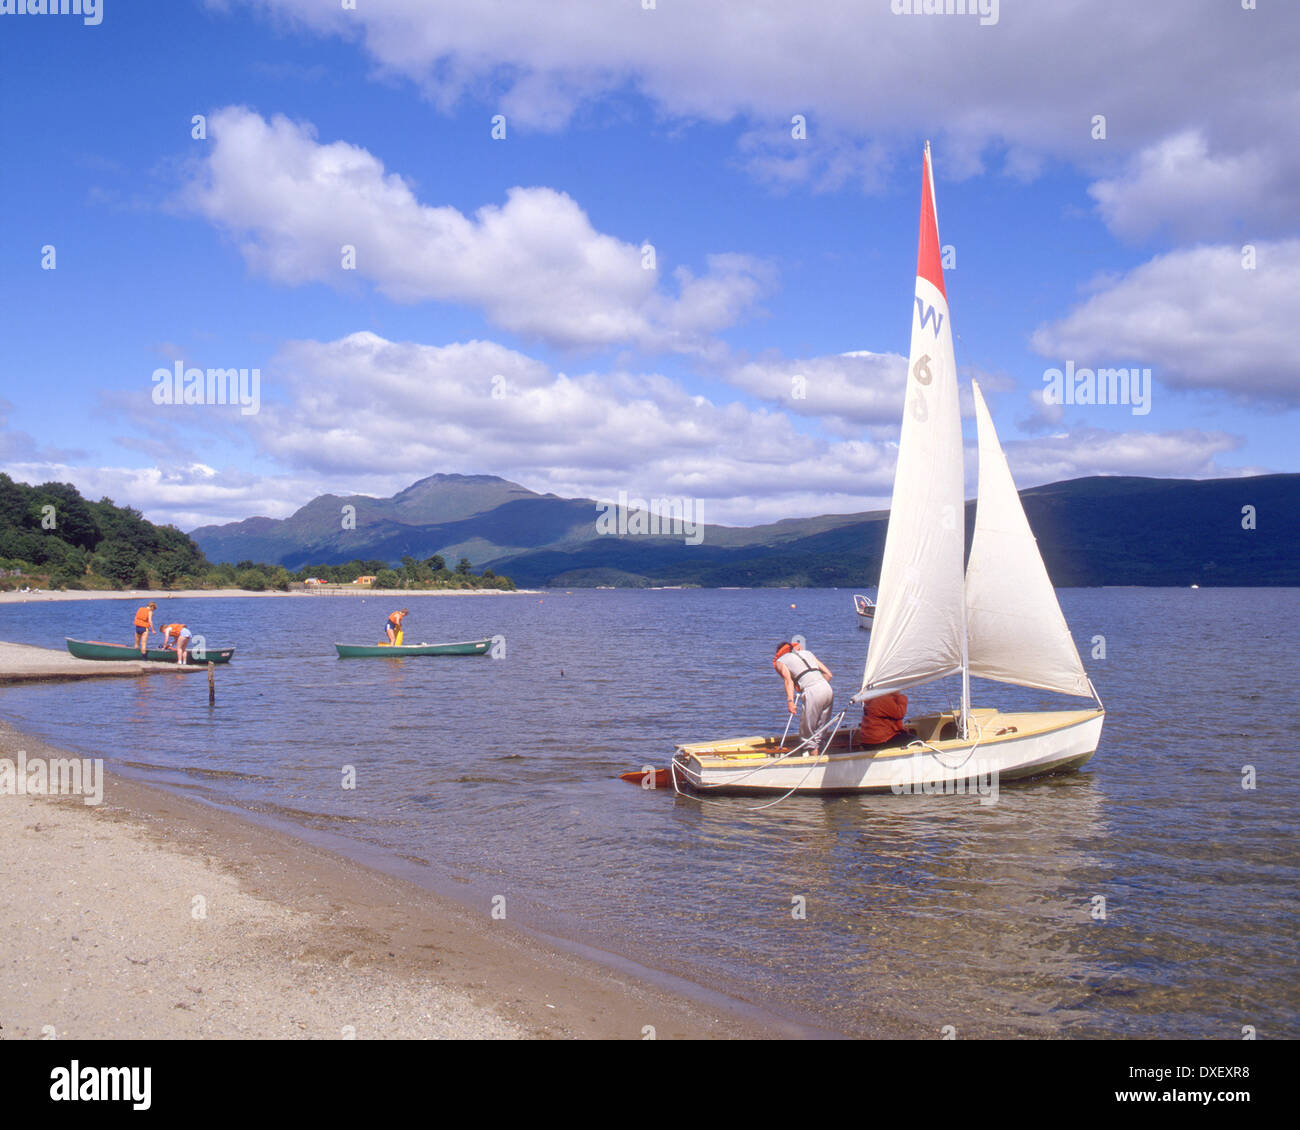 Sailing on Loch Lomond with Ben Lomond in view, Dumbartonshire. Stock Photo